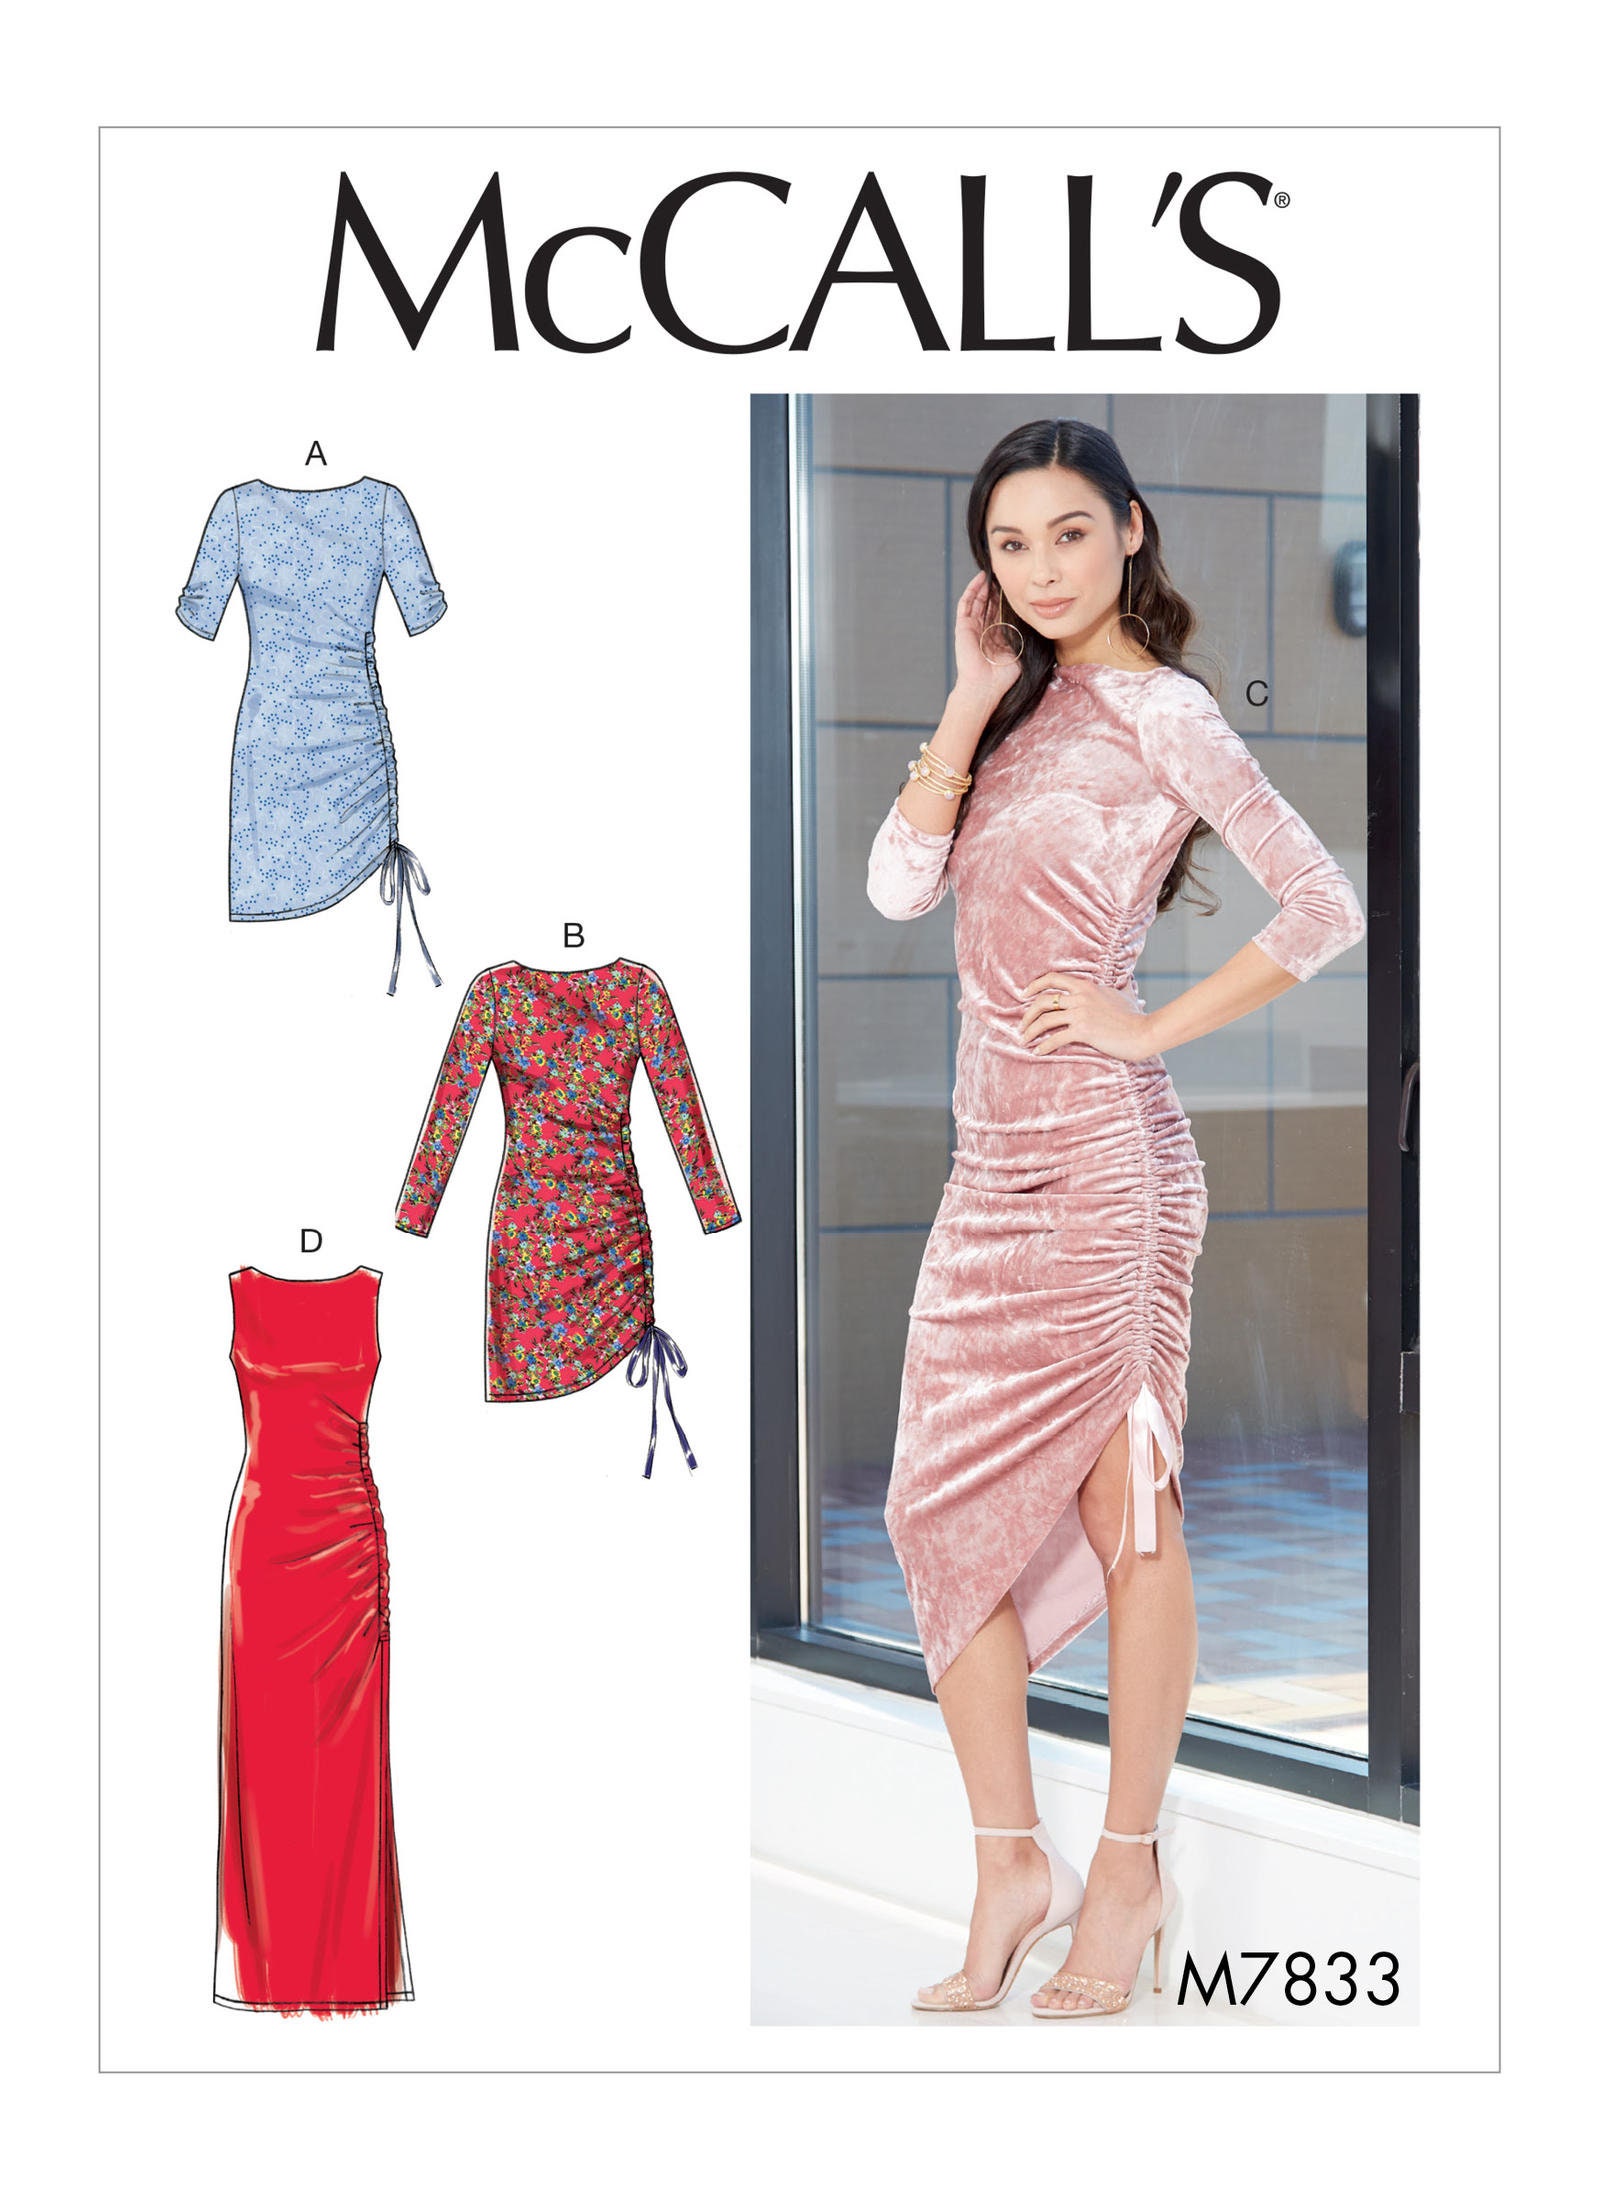 Sewing Pattern for Womens' Dress in Misses Sizes, McCall's Pattern M7833,  New Pattern, Dress Pattern in Stretch Knit with Side Gathers